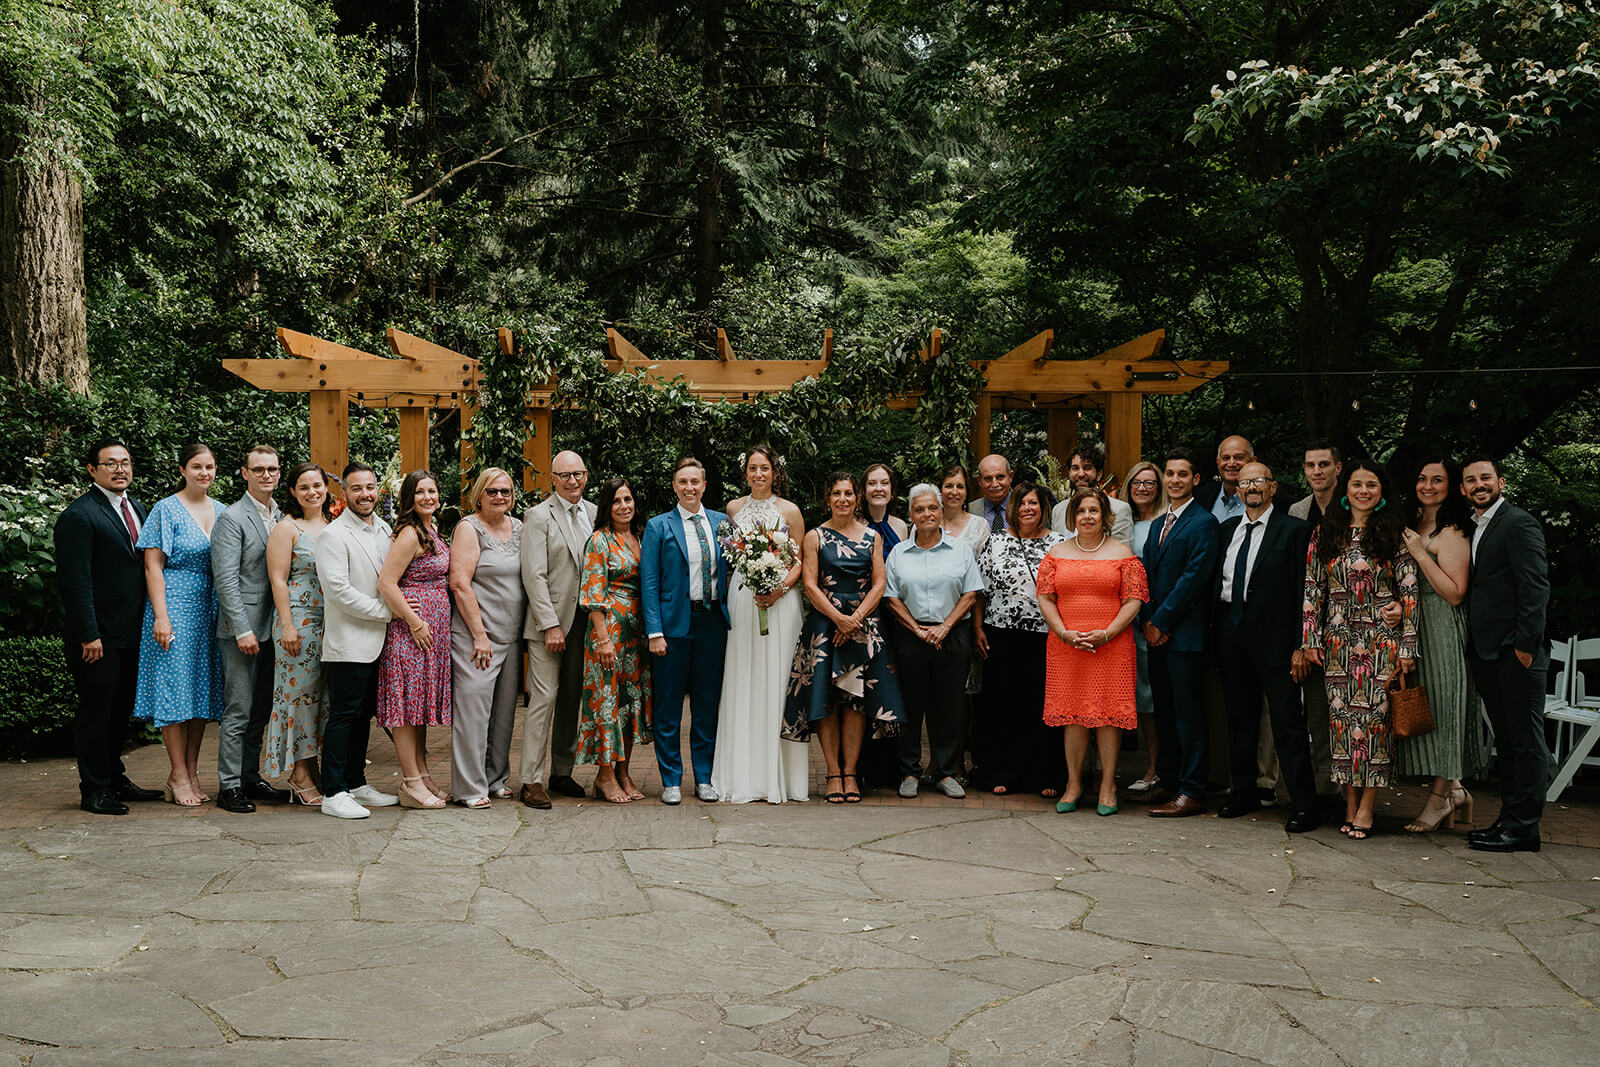 Two brides pose for wedding portraits with family and friends